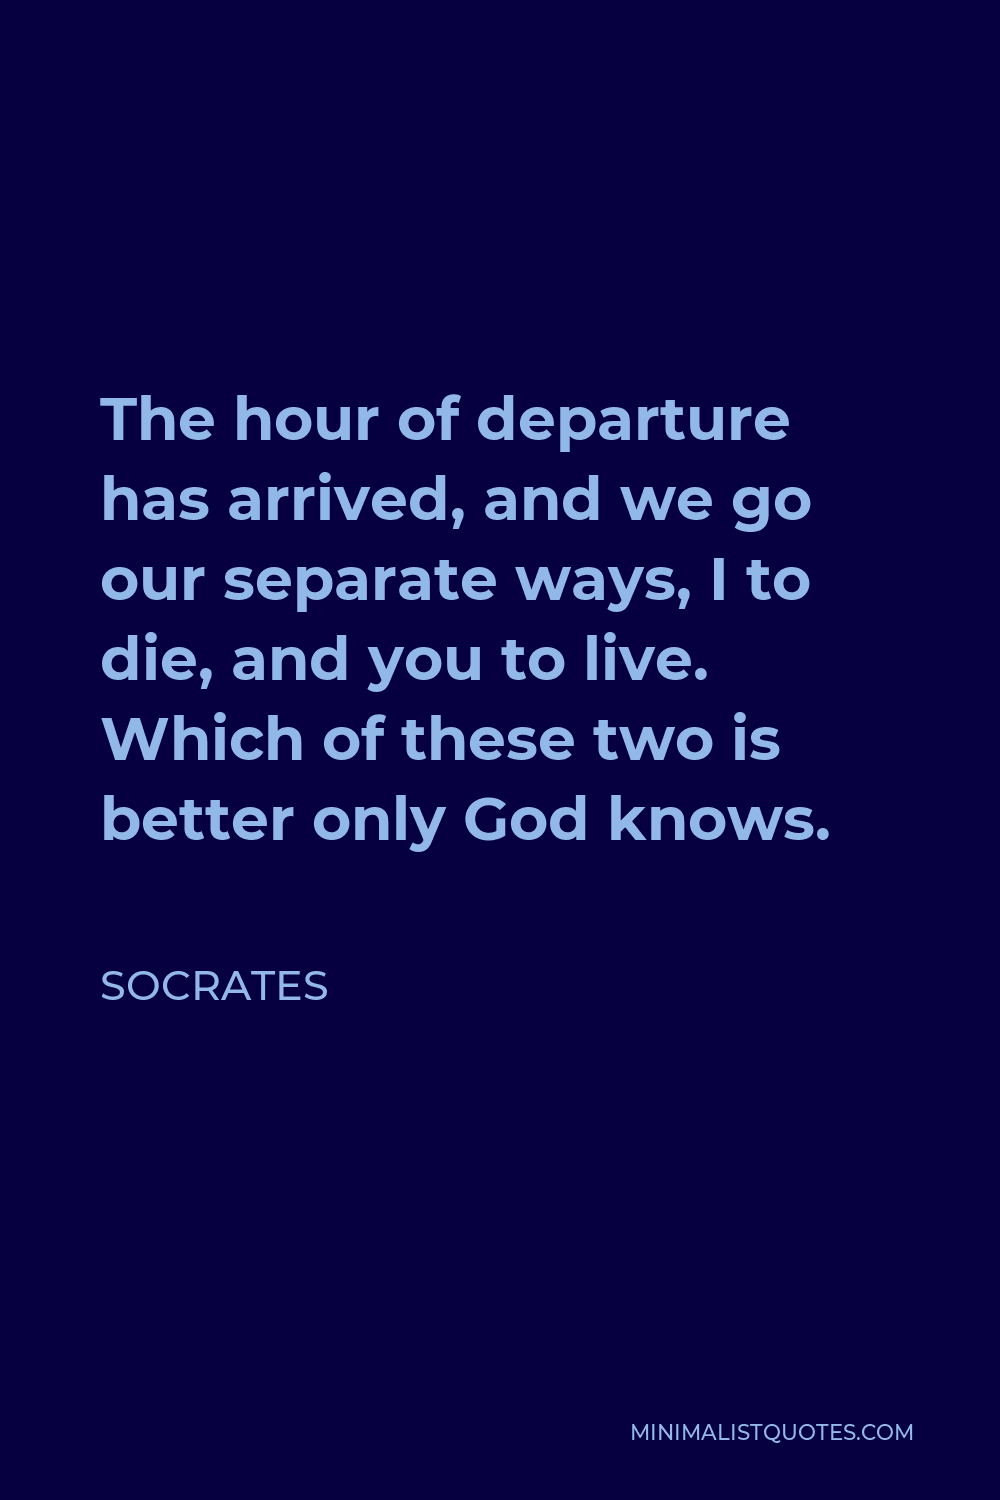 Socrates Quote - The hour of departure has arrived, and we go our separate ways, I to die, and you to live. Which of these two is better only God knows.